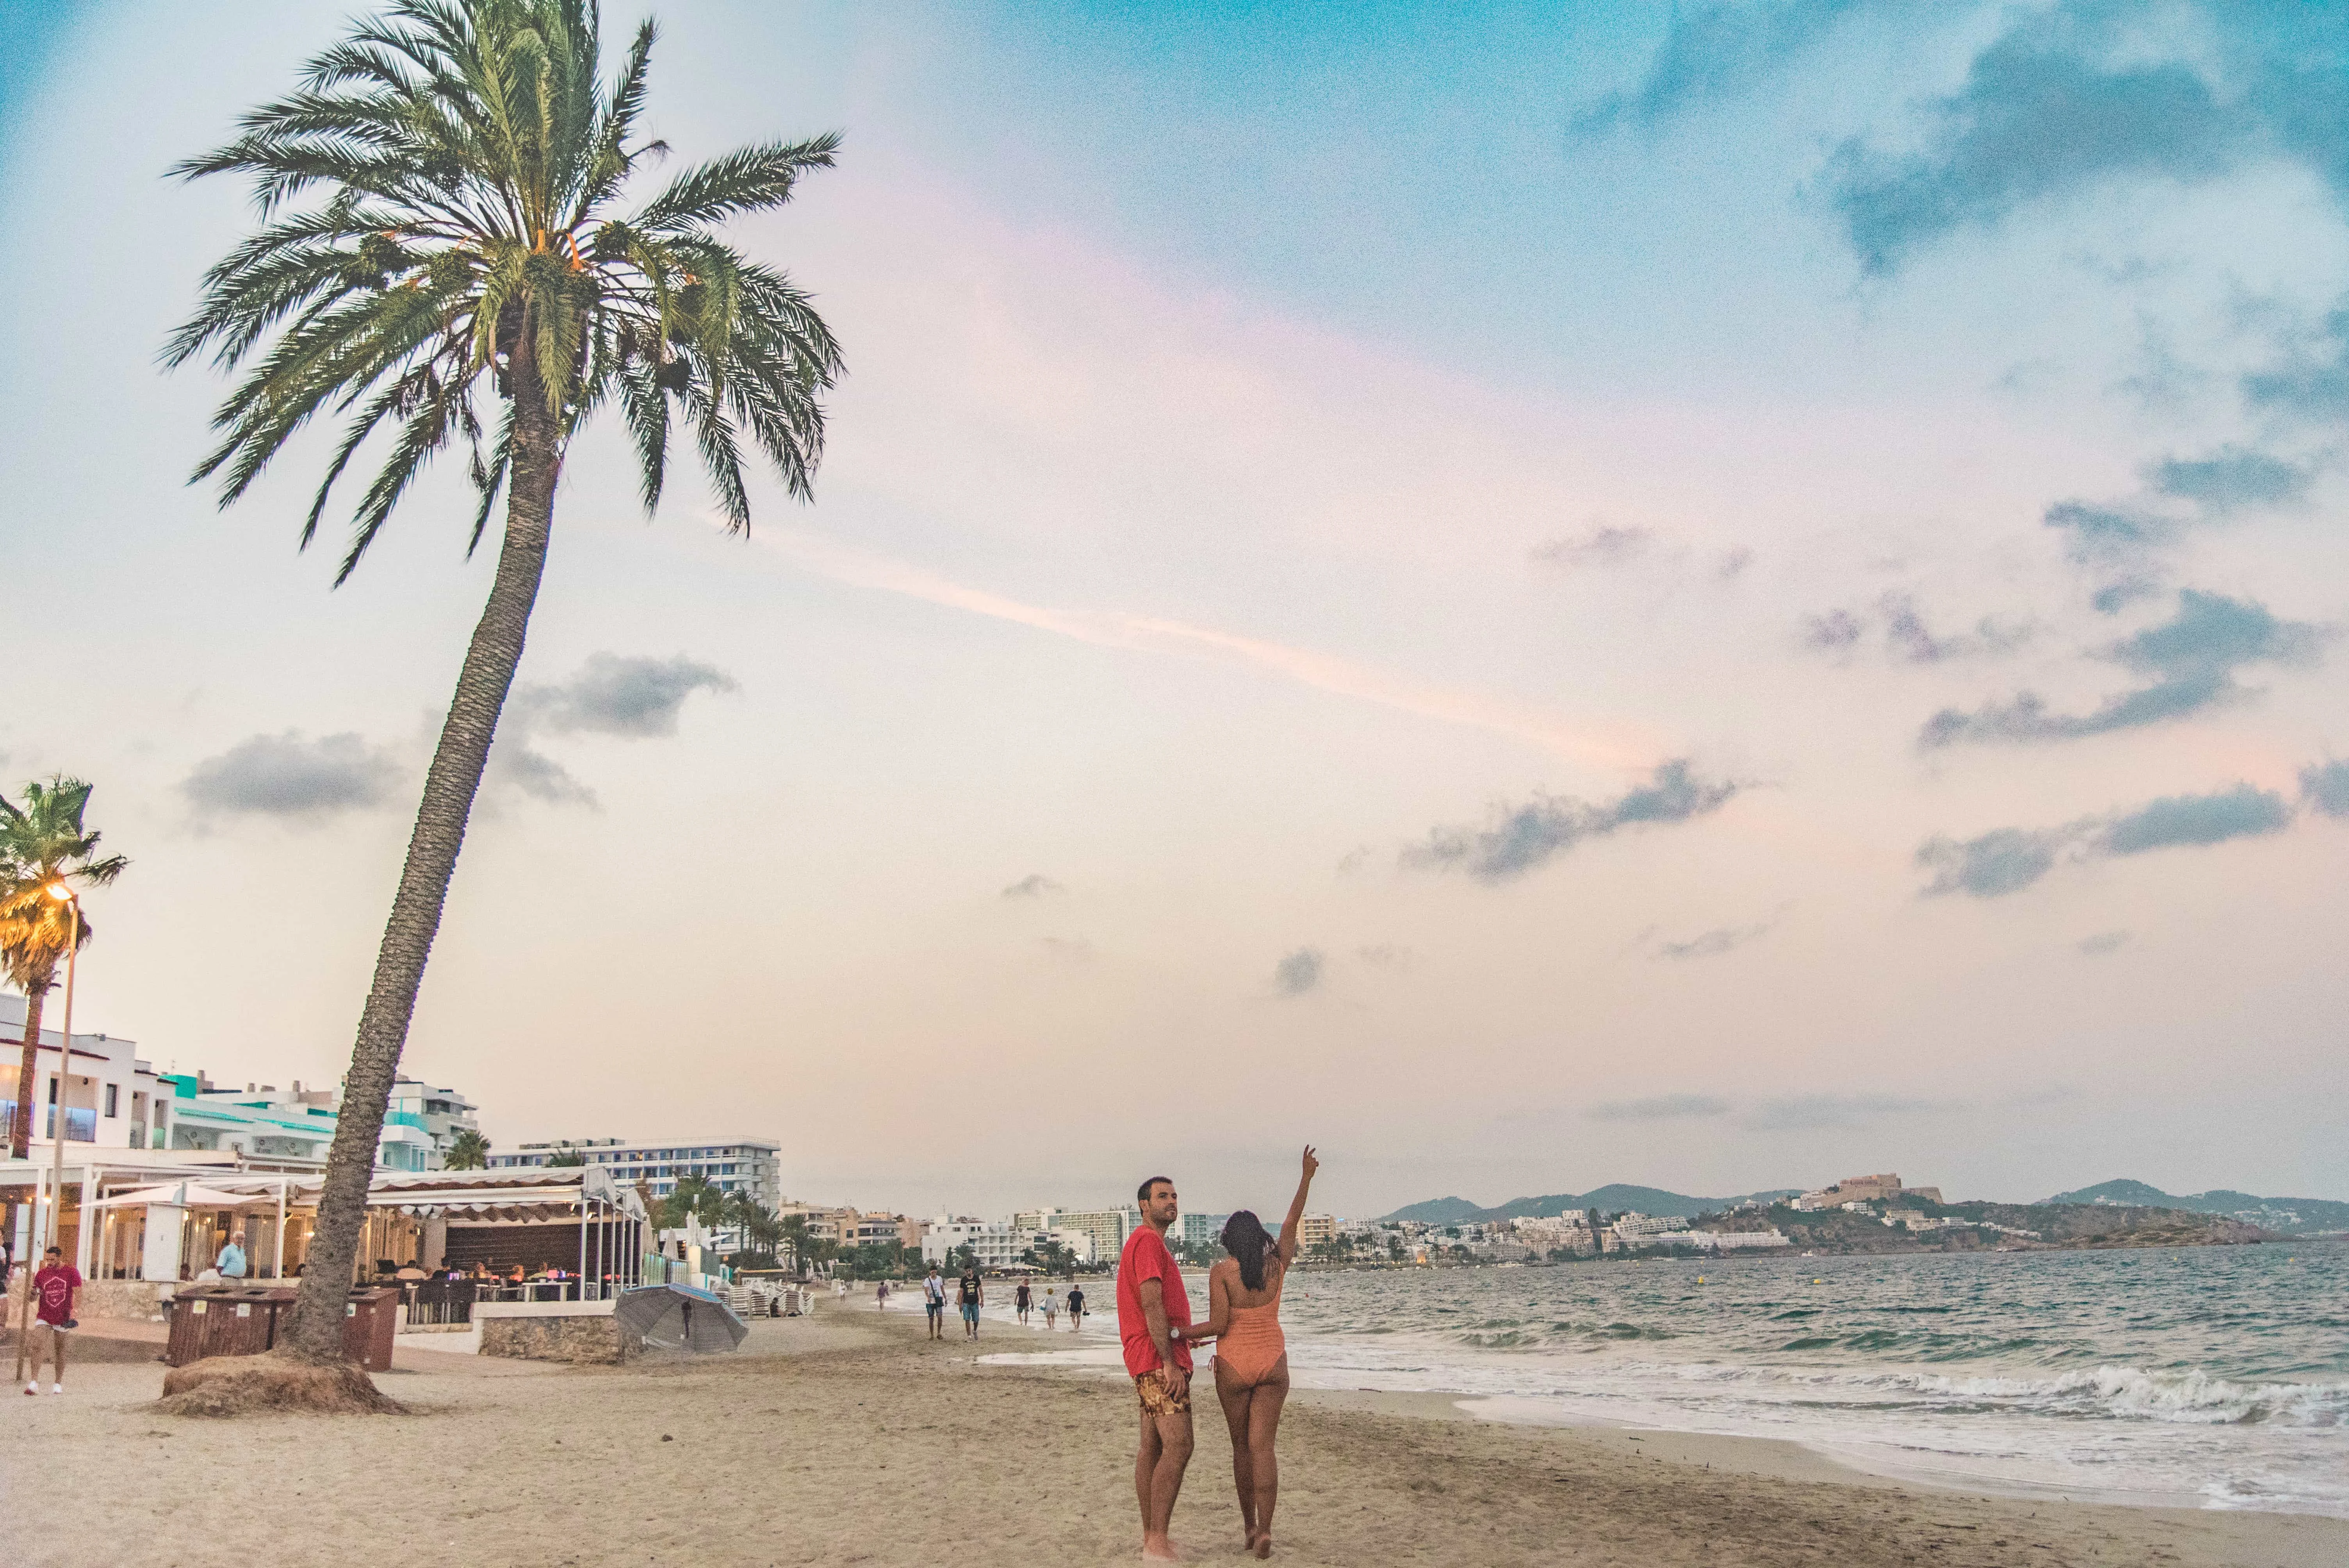 things to do in Ibiza, places to visit in Ibiza, festivals in Ibiza, best time to visit Ibiza, daily budget in Ibiza, food to try in Ibiza, how to get to Ibiza, road trip Ibiza, beaches  in Ibiza, Playa d’en Bossa, instagrammable places in ibiza, Ibiza instagram spots